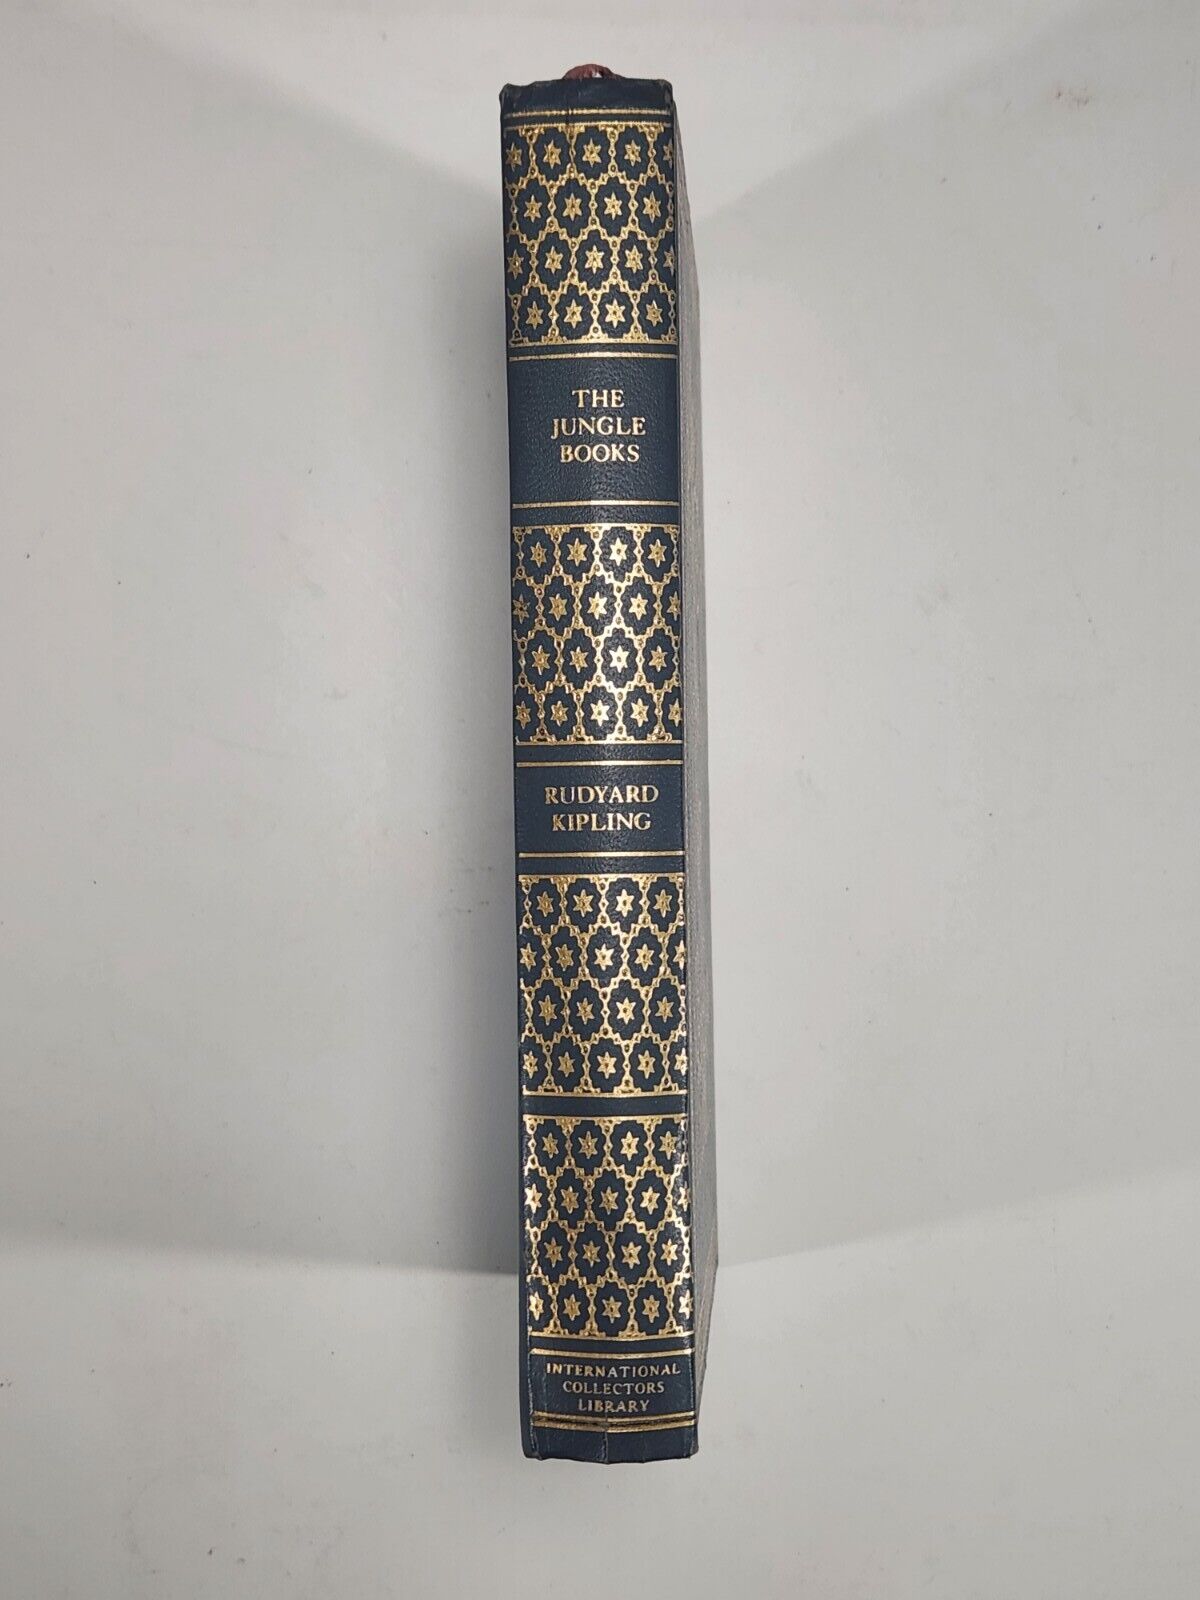 The Jungle Books By Rudyard Kipling International Collectors Library